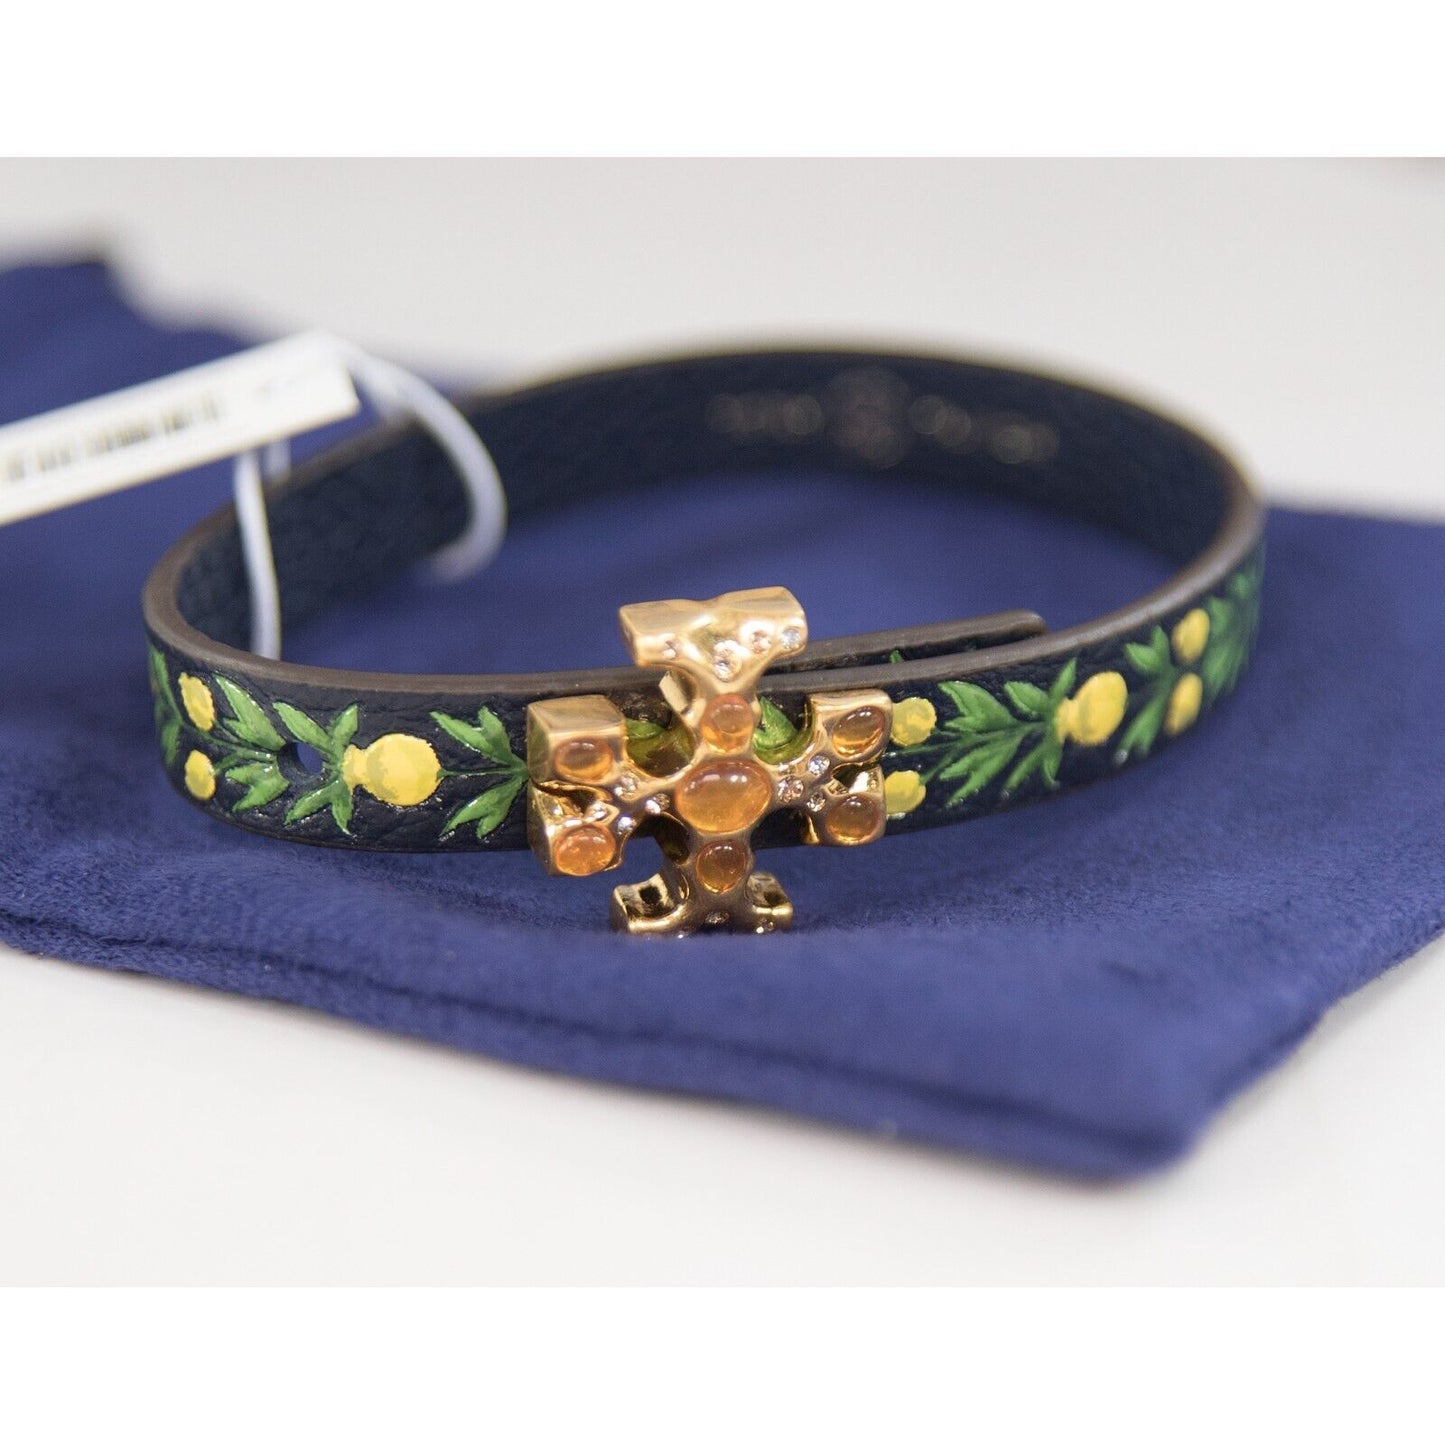 Tory Burch Roxanne Jeweled Floral Painted Leather Wrap Bracelet NWT